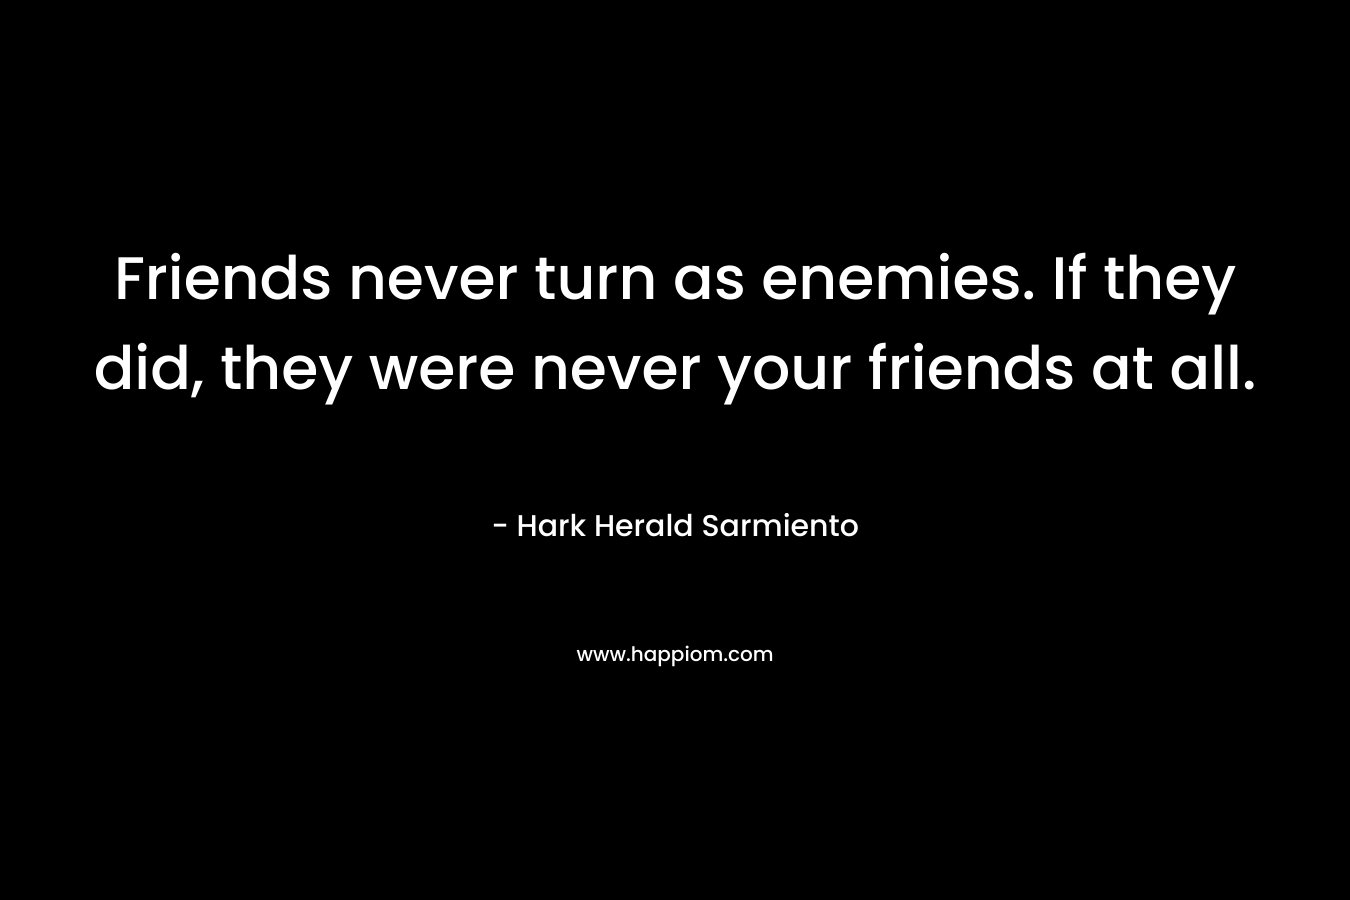 Friends never turn as enemies. If they did, they were never your friends at all.